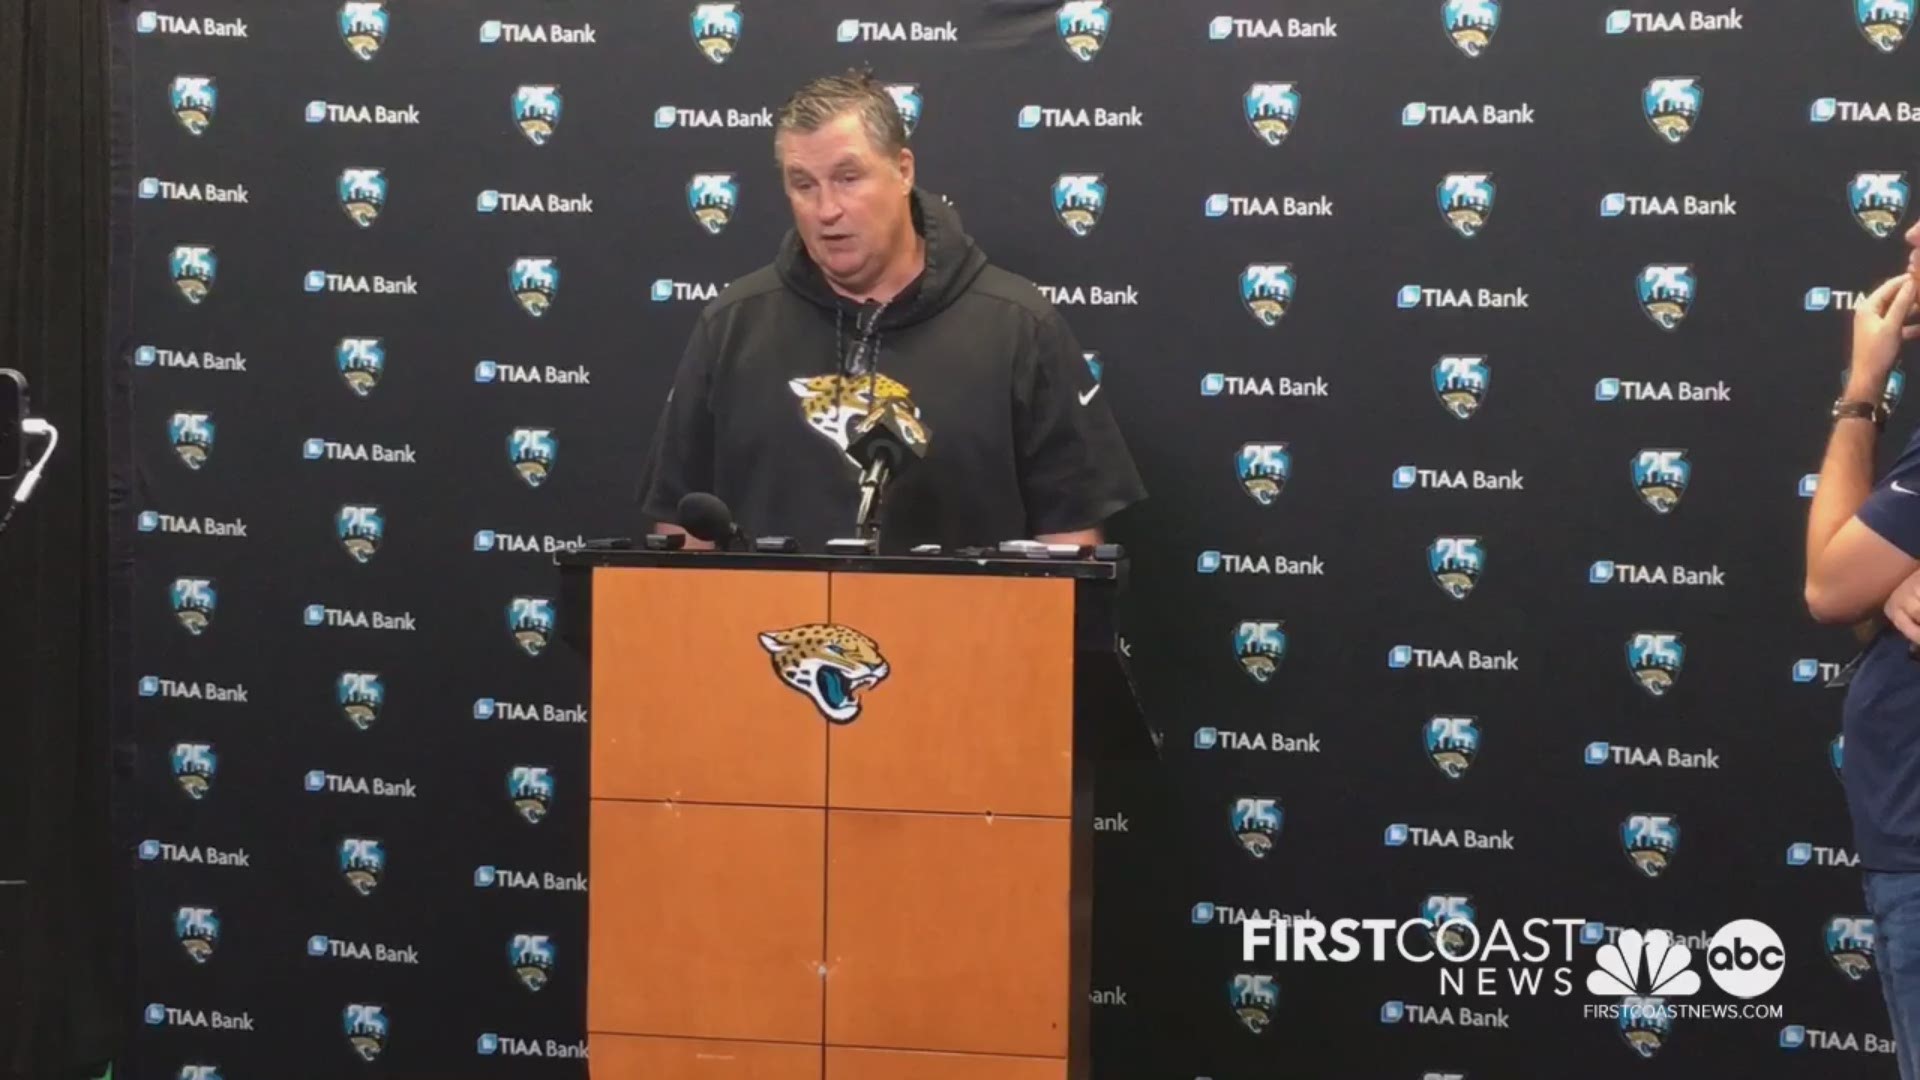 Jaguars Head Coach, Doug Marrone, discusses the injury report - including Jalen Ramsey - ahead of Sunday's game at Denver.